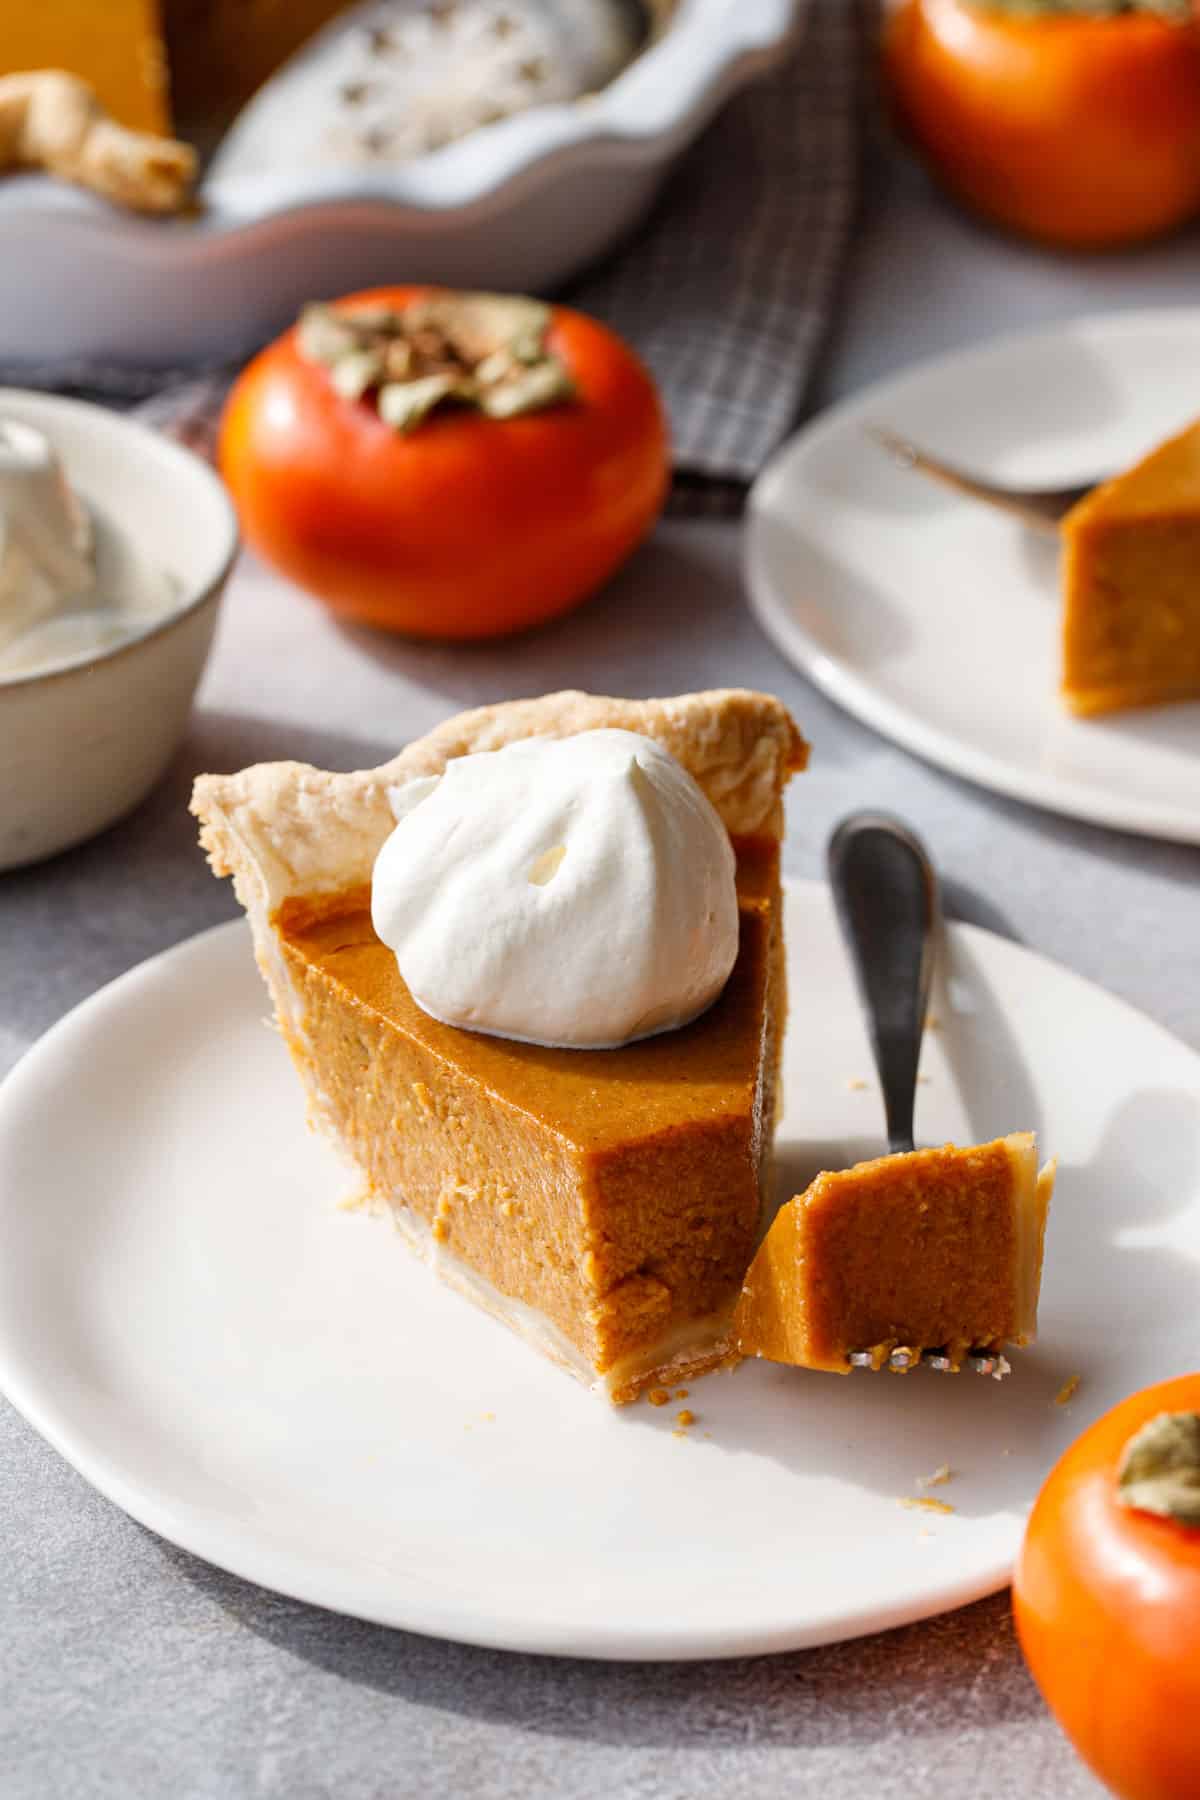 Bite resting on a fork with a slice of Persimmon Pie on a white plate, orange persimmons and a bowl of whipped cream.